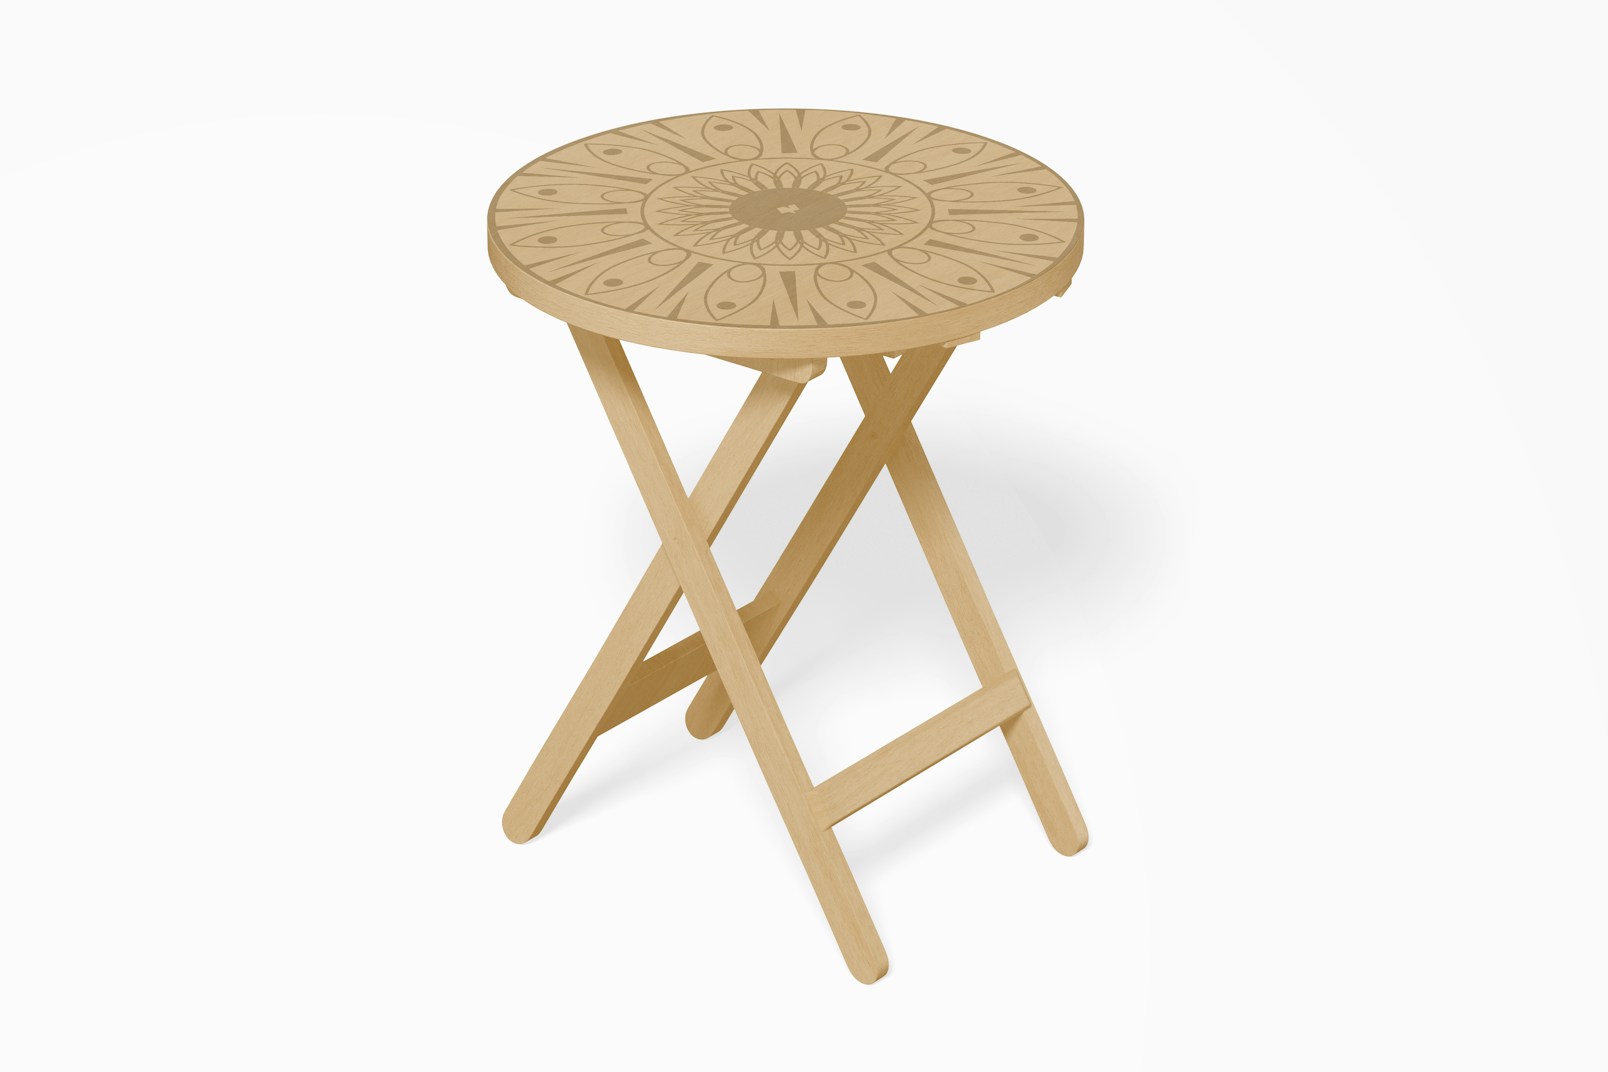 Round Folding Table Mockup, Perspective